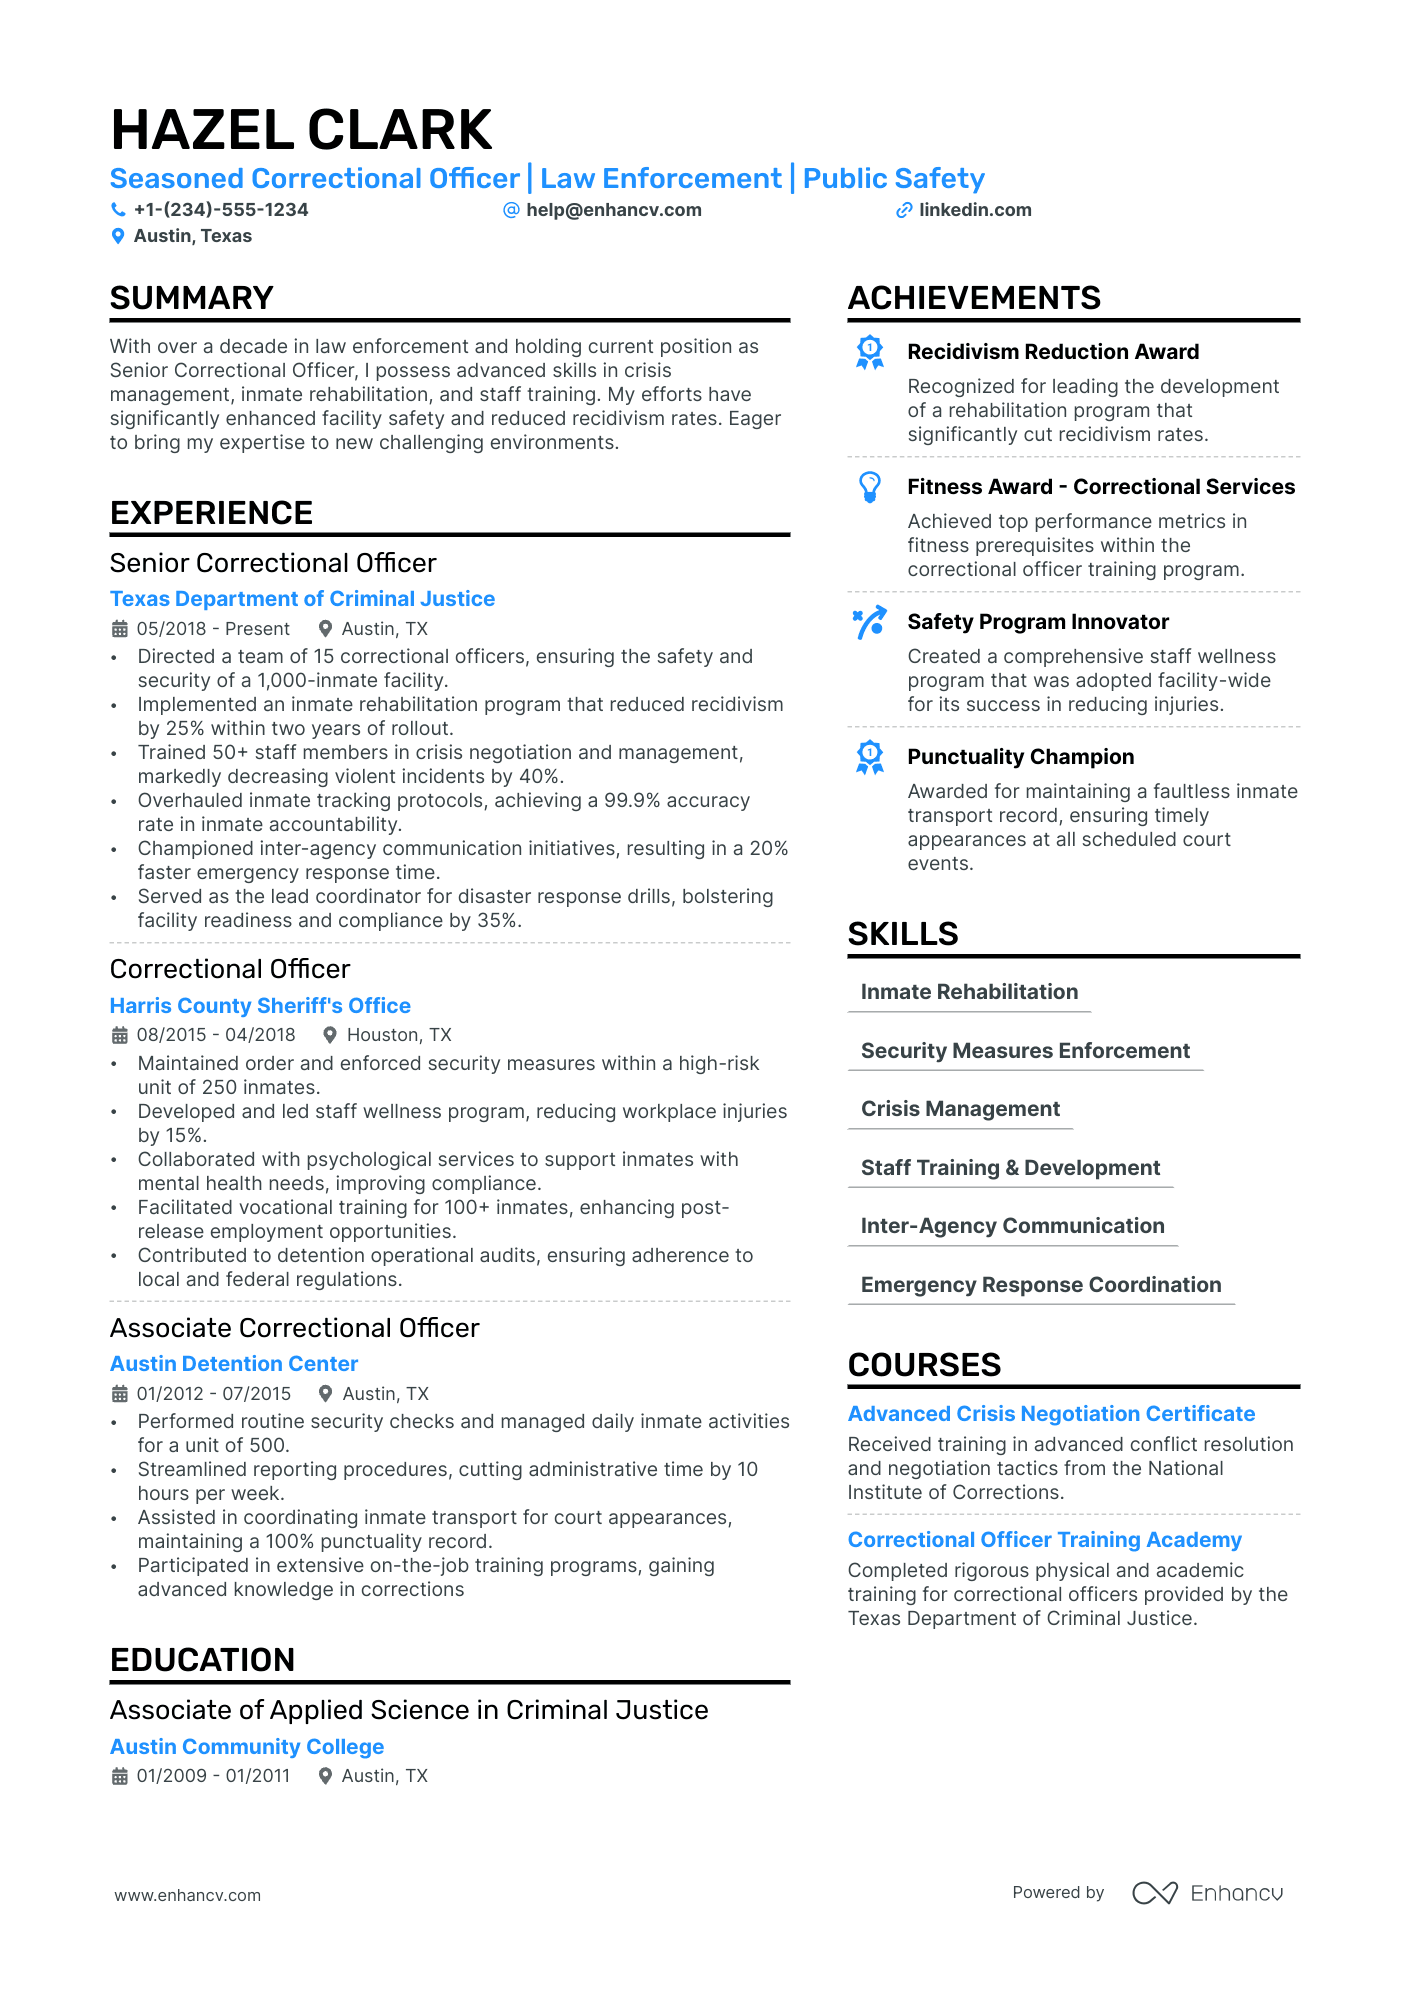 Correctional Officer resume example